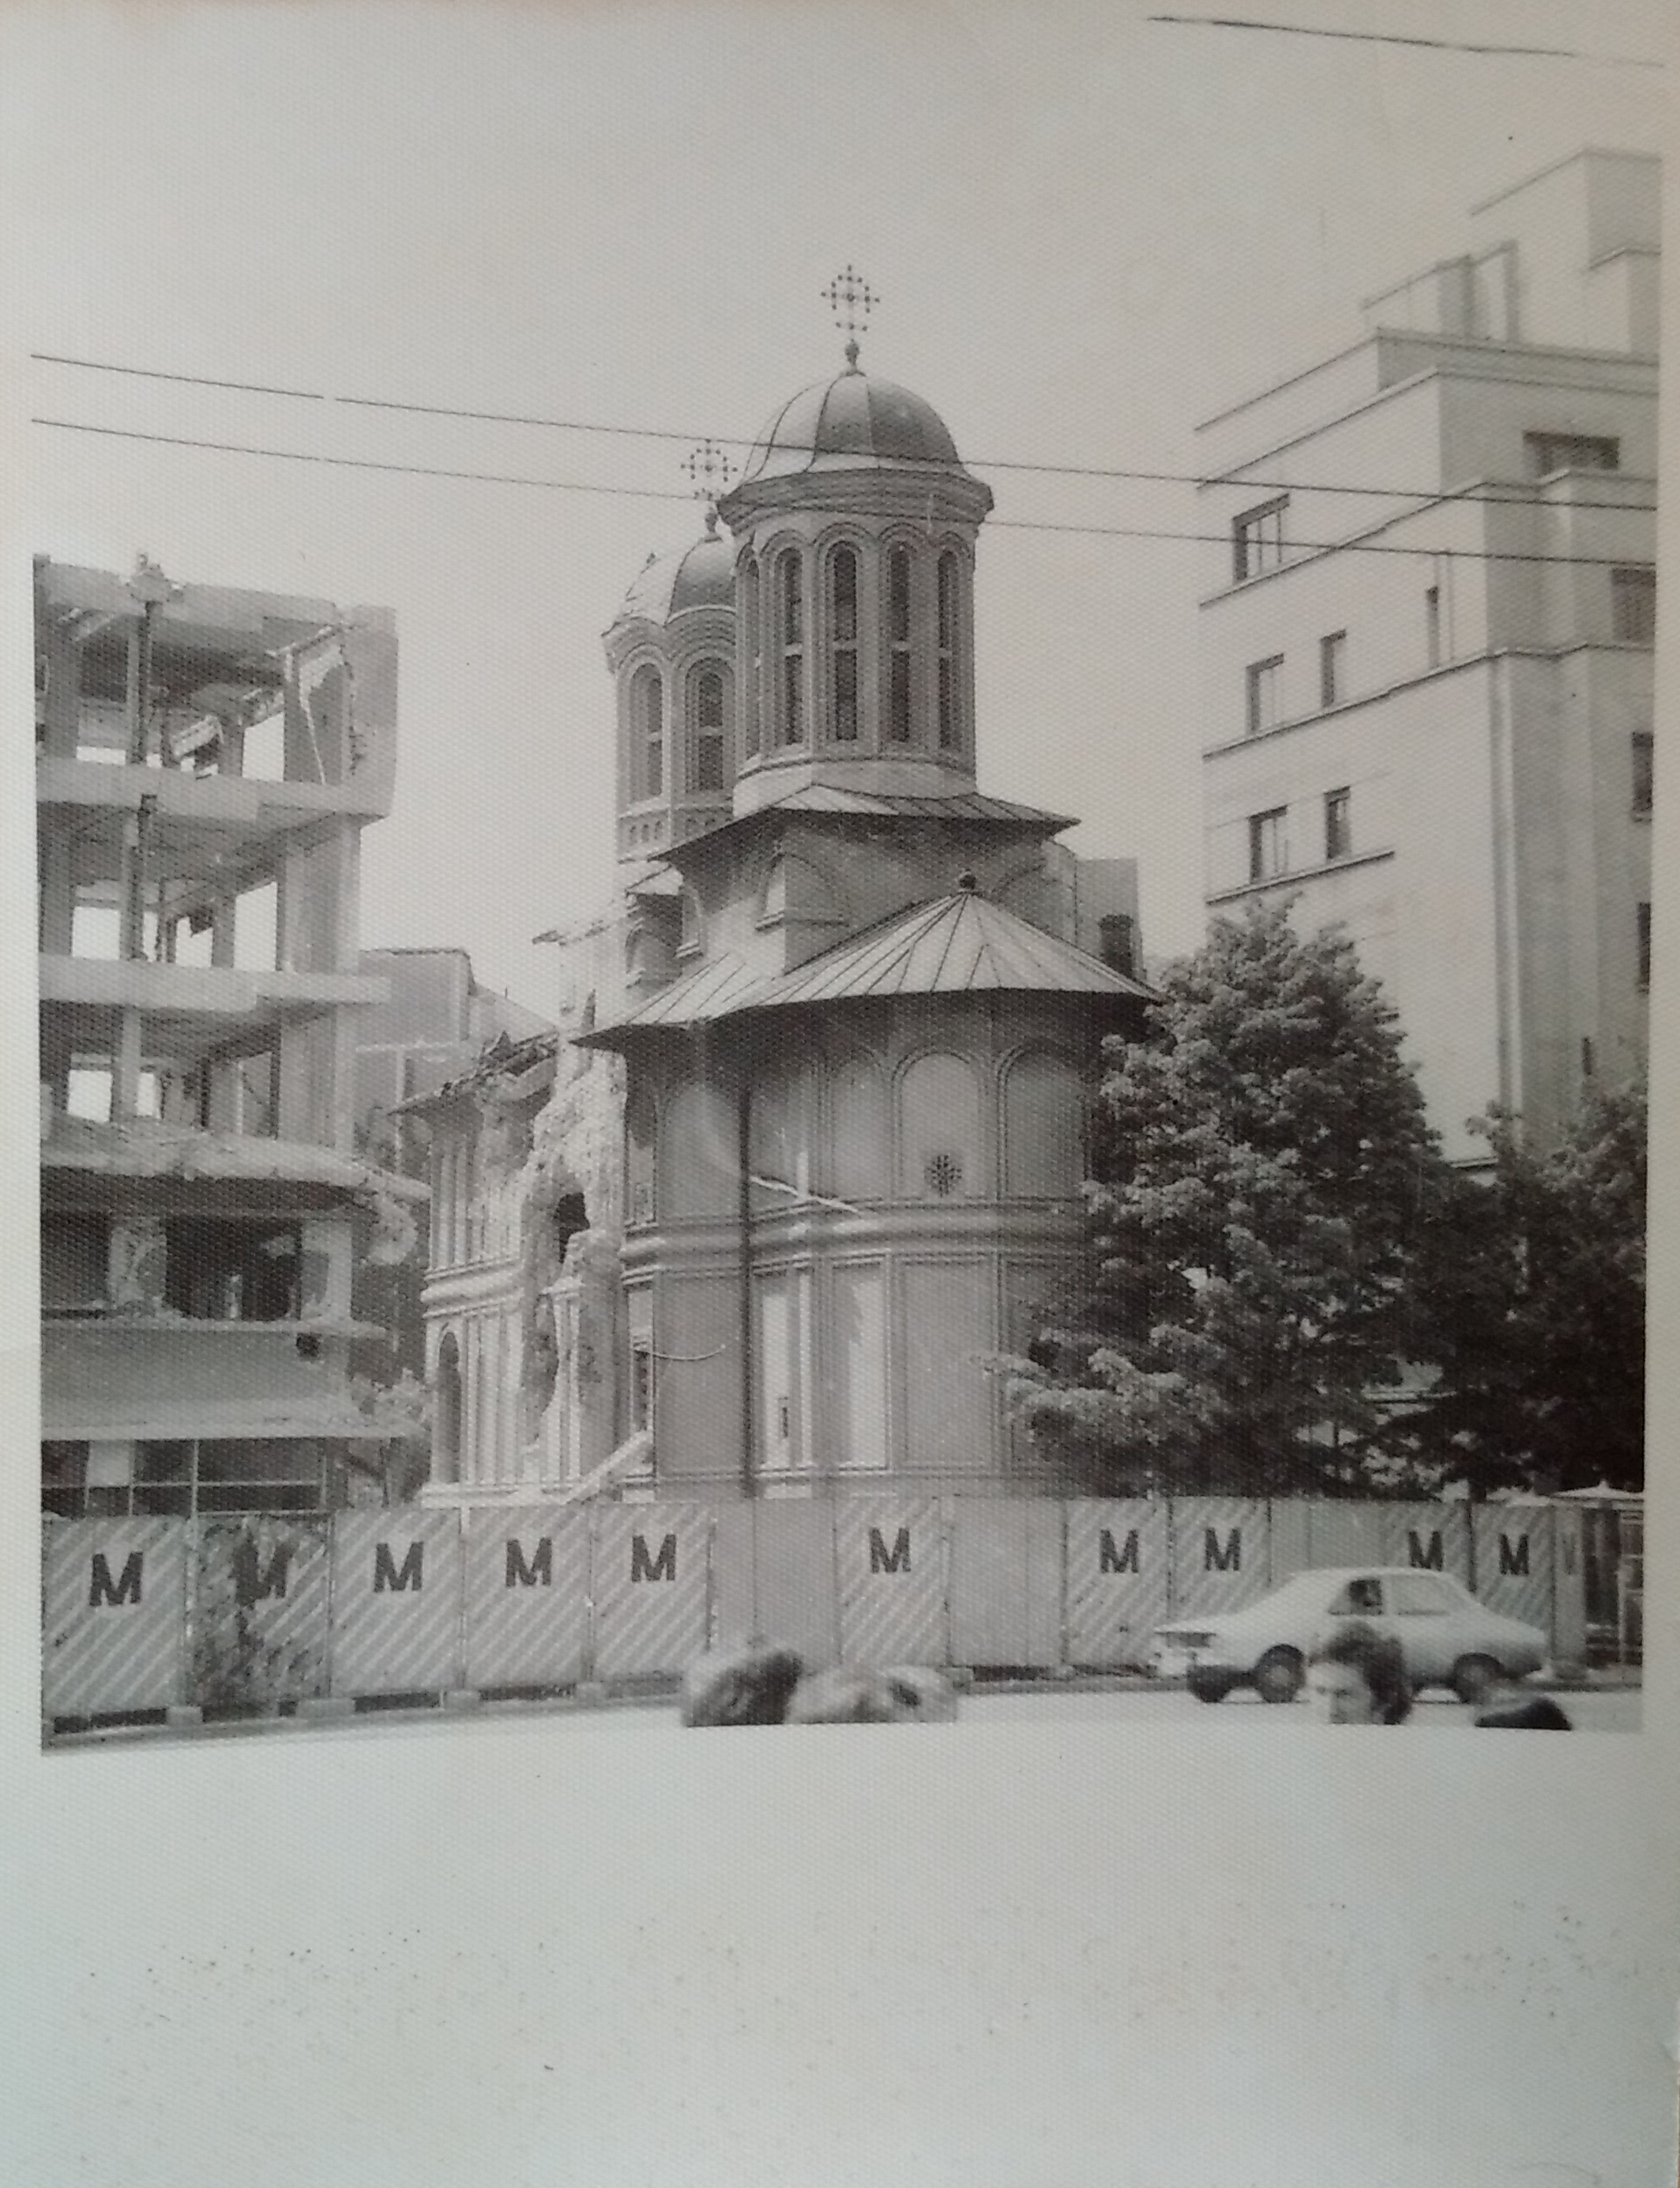 Enei Church damaged by the 1977 earthquake before demolition